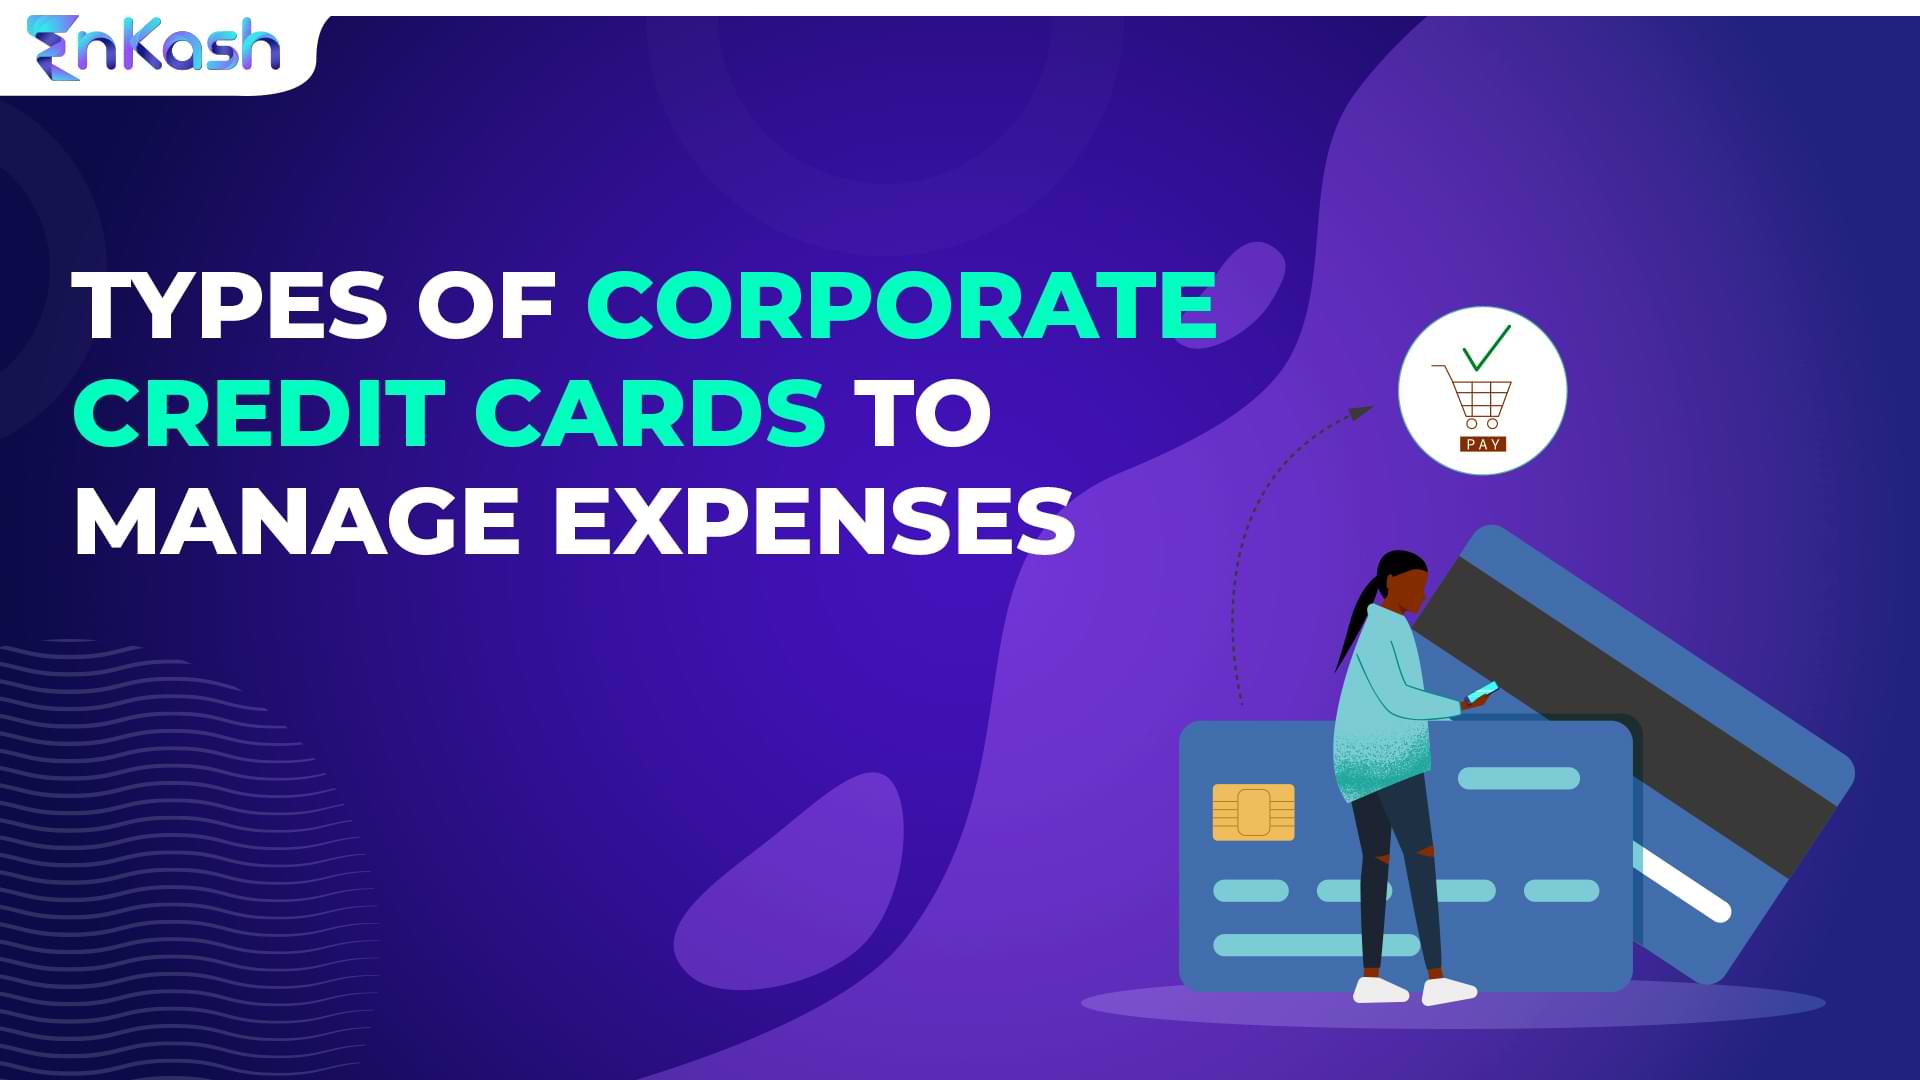 Types of corporate credit cards to manage expenses